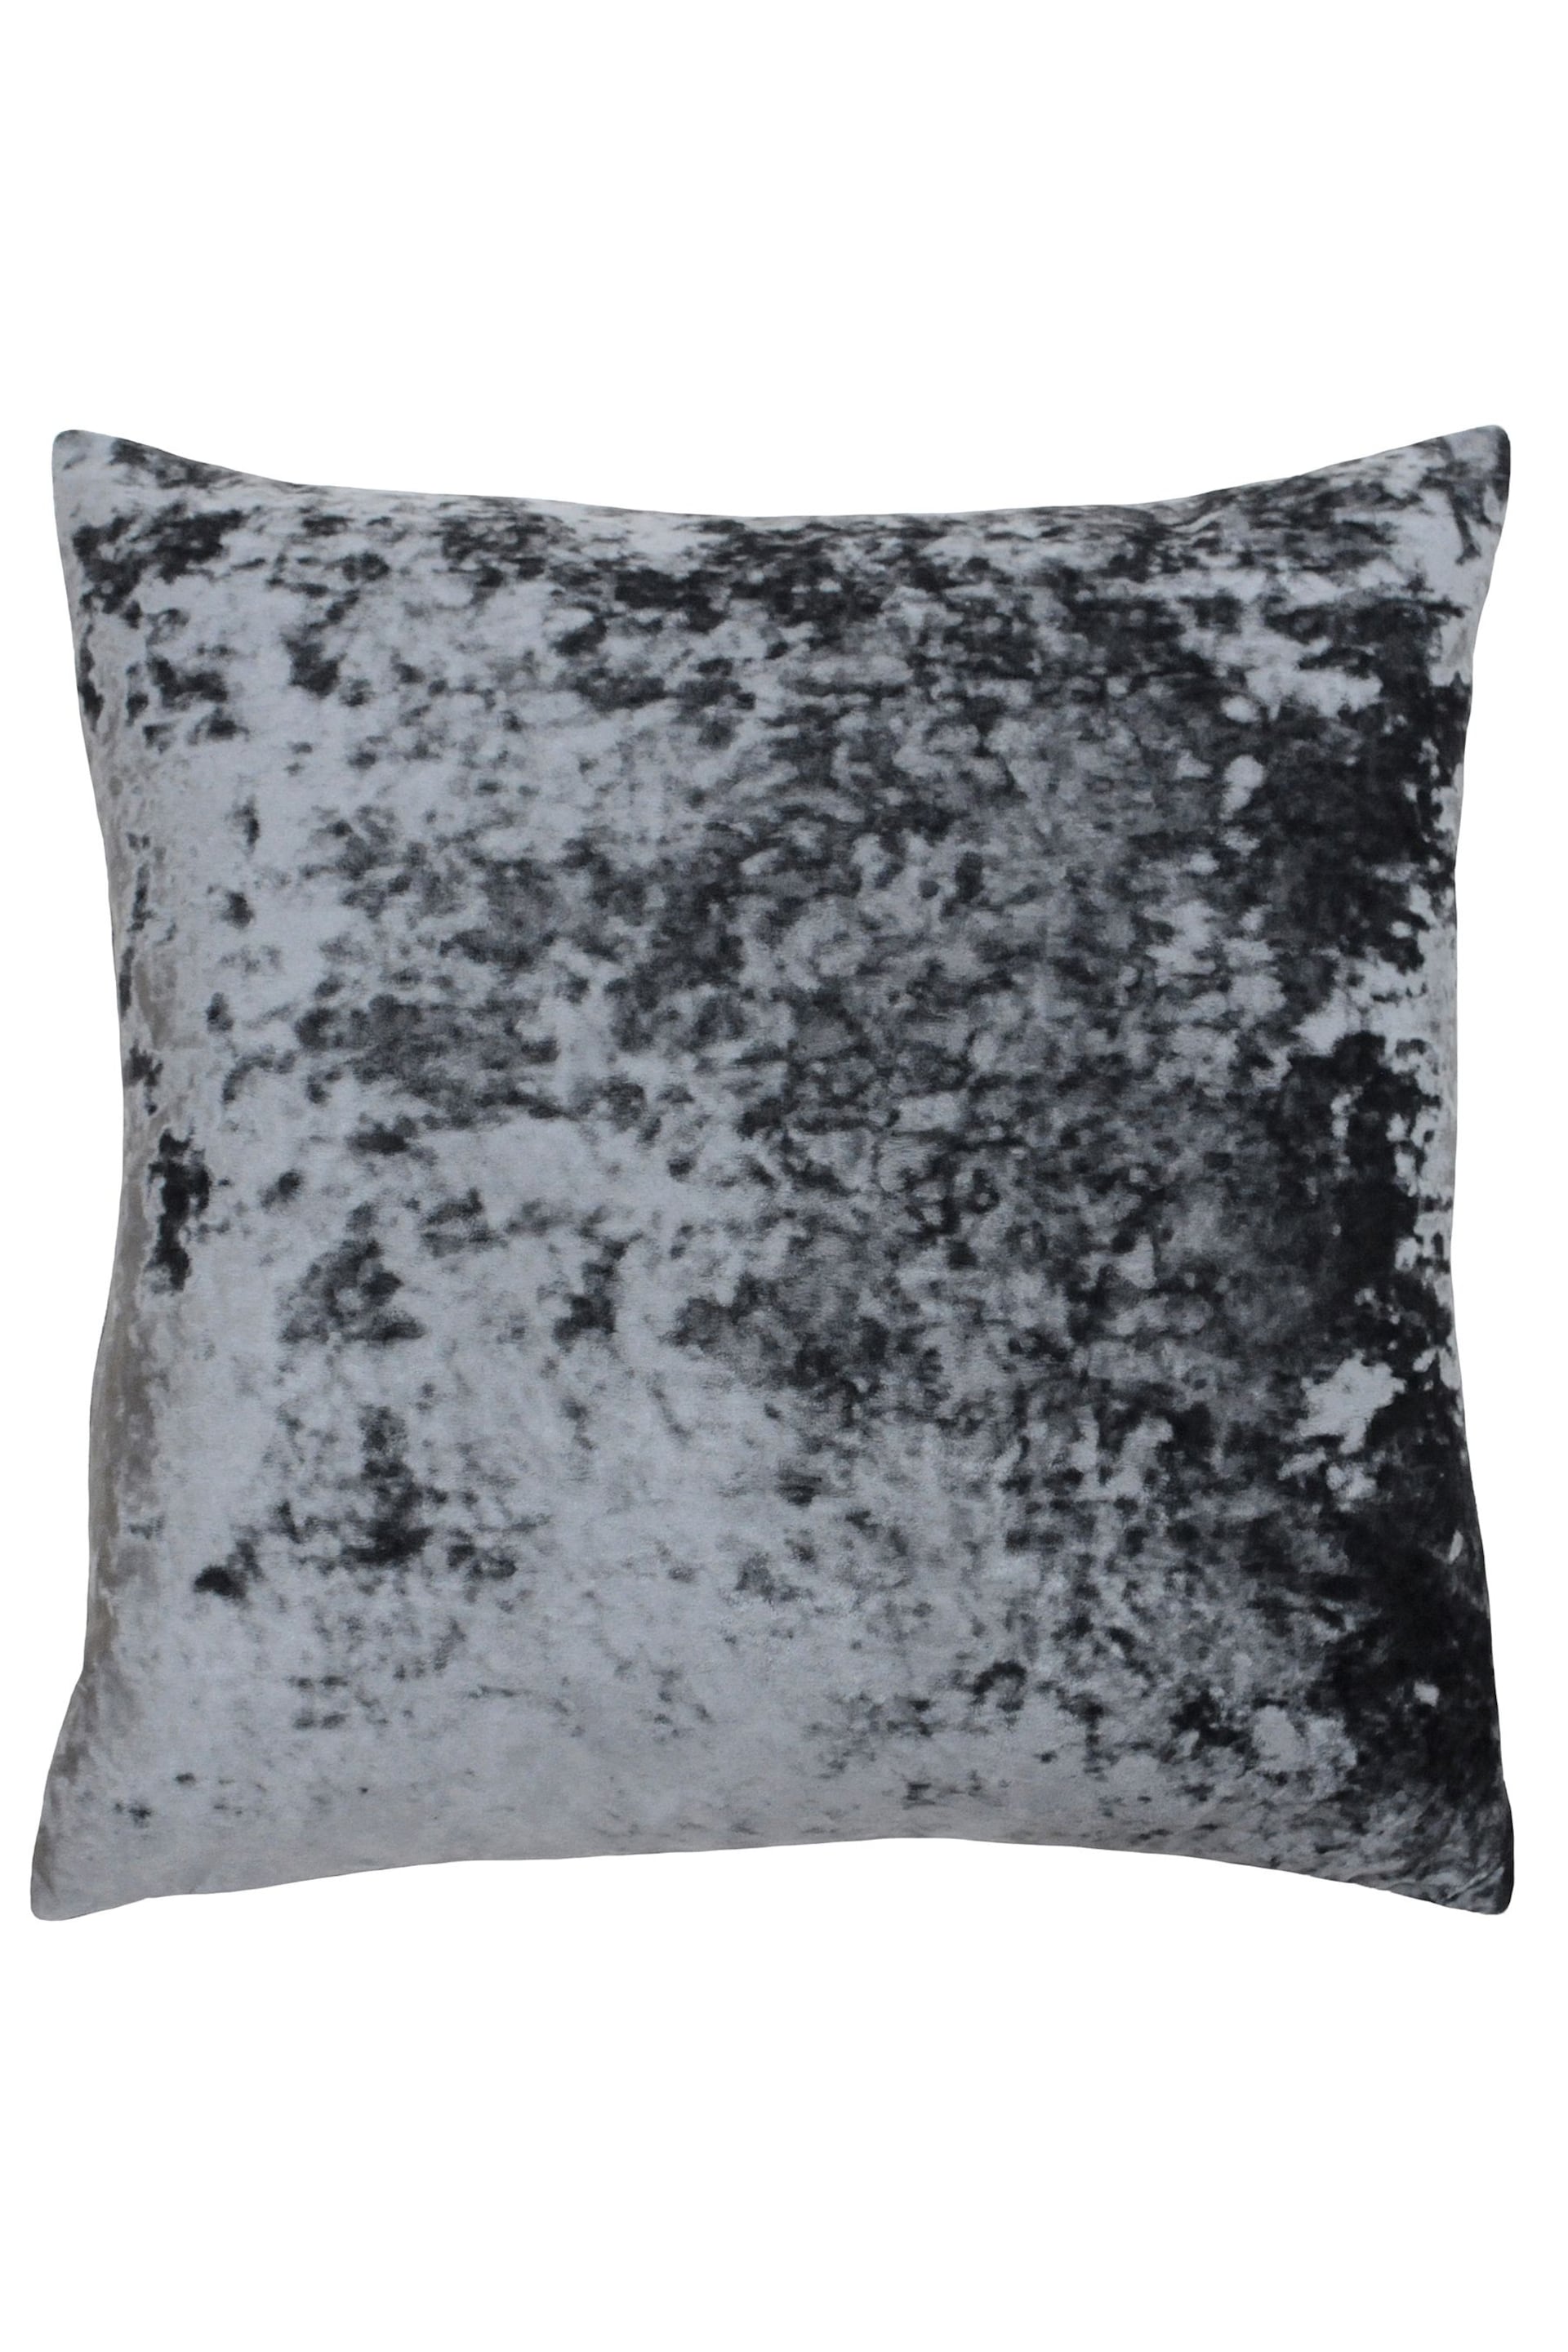 Riva Paoletti Pewter Grey Verona Crushed Velvet Polyester Filled Cushion - Image 1 of 2